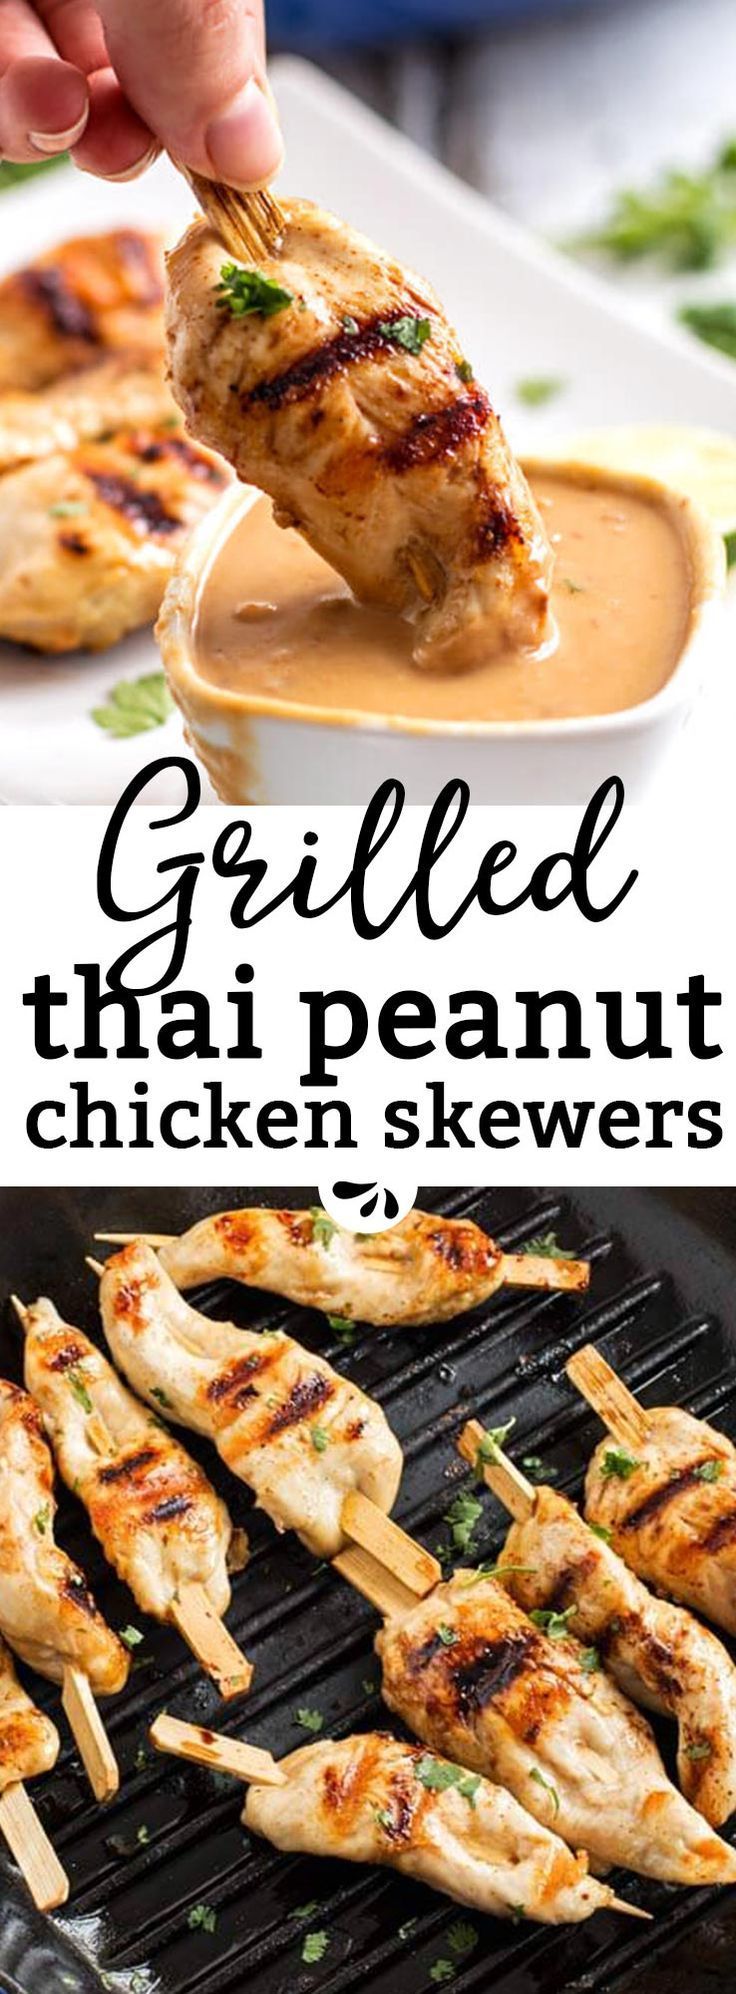 Are you looking for an easy grilled chicken recipe? These grilled chicken skewers with Thai peanut sauce are an incredible satay-inspired idea! Serve them as part of a BBQ potluck or summer picnic. They work as a simple dinner, too. The sauce is no-cook and made with just a few ingredients like peanut butter and lime juice. A simple, healthy and kid-friendly BBQ recipe everyone will enjoy! -   21 grilling recipes for kids
 ideas